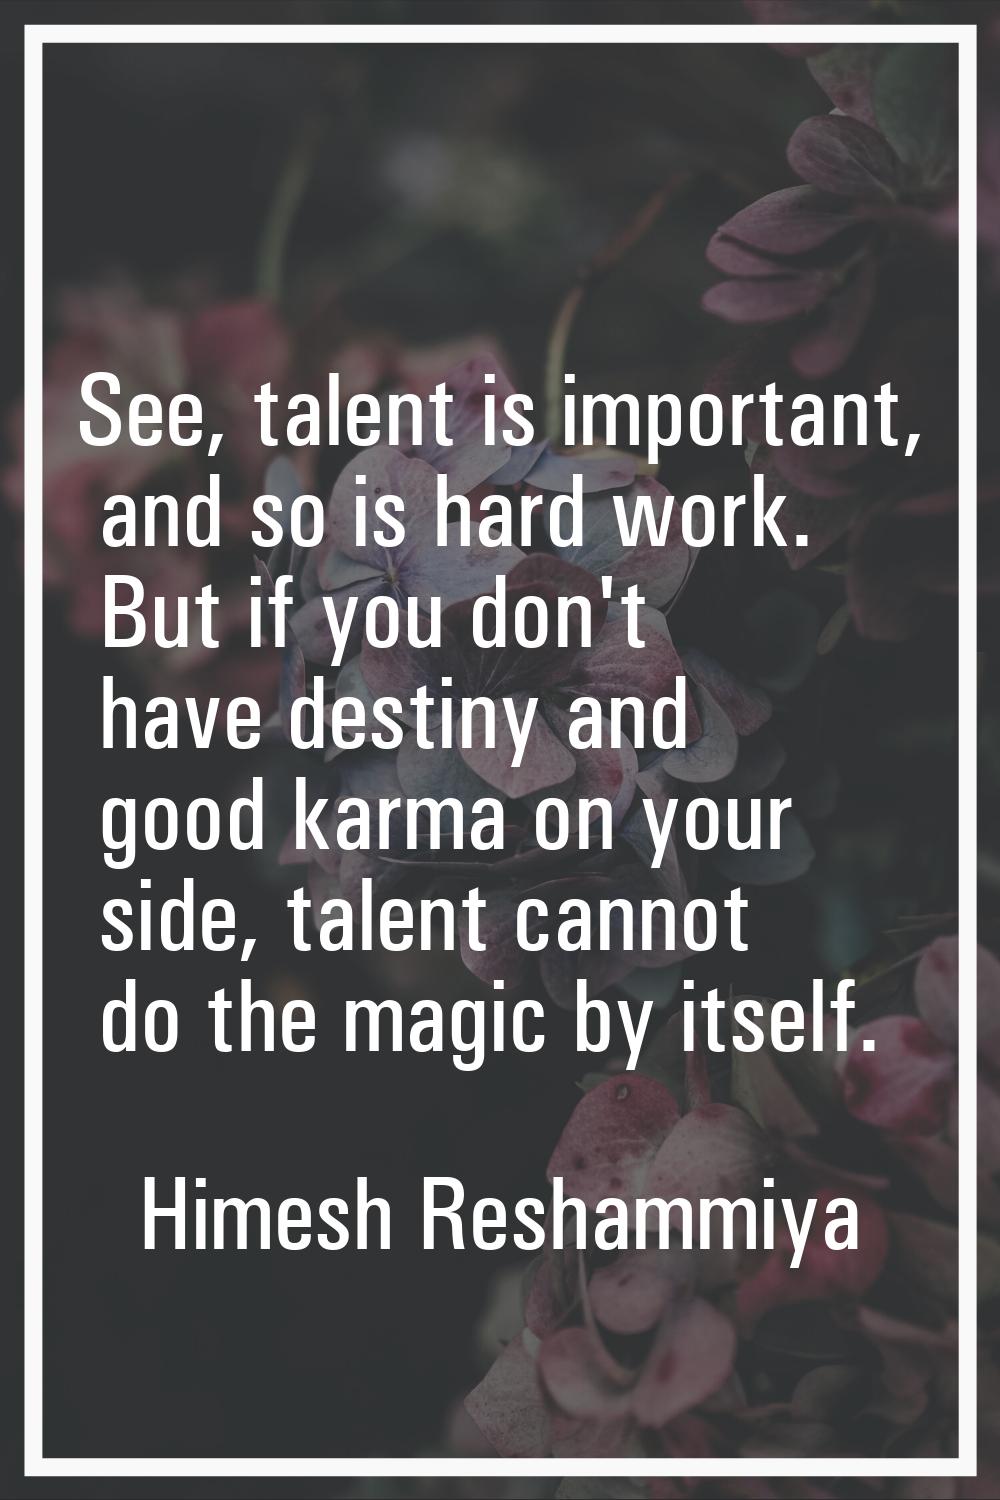 See, talent is important, and so is hard work. But if you don't have destiny and good karma on your